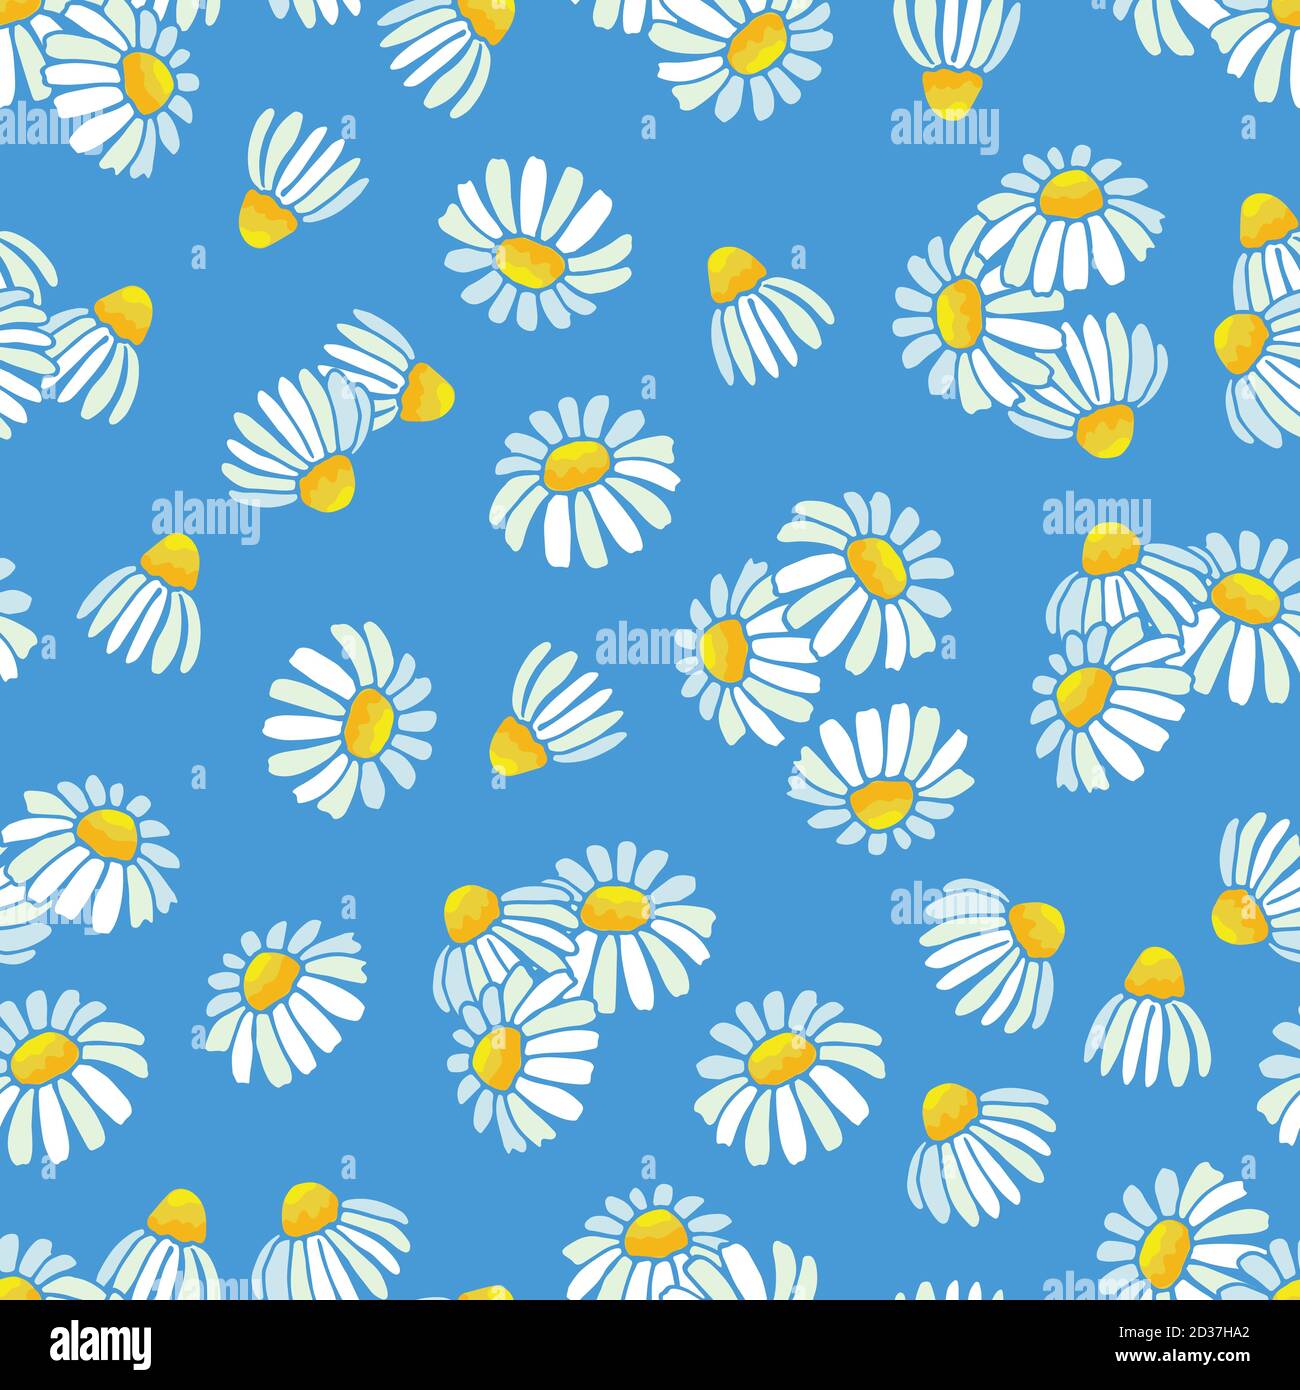 Chamomile, daisy vector pattern. Floral seamless texture Stock Vector